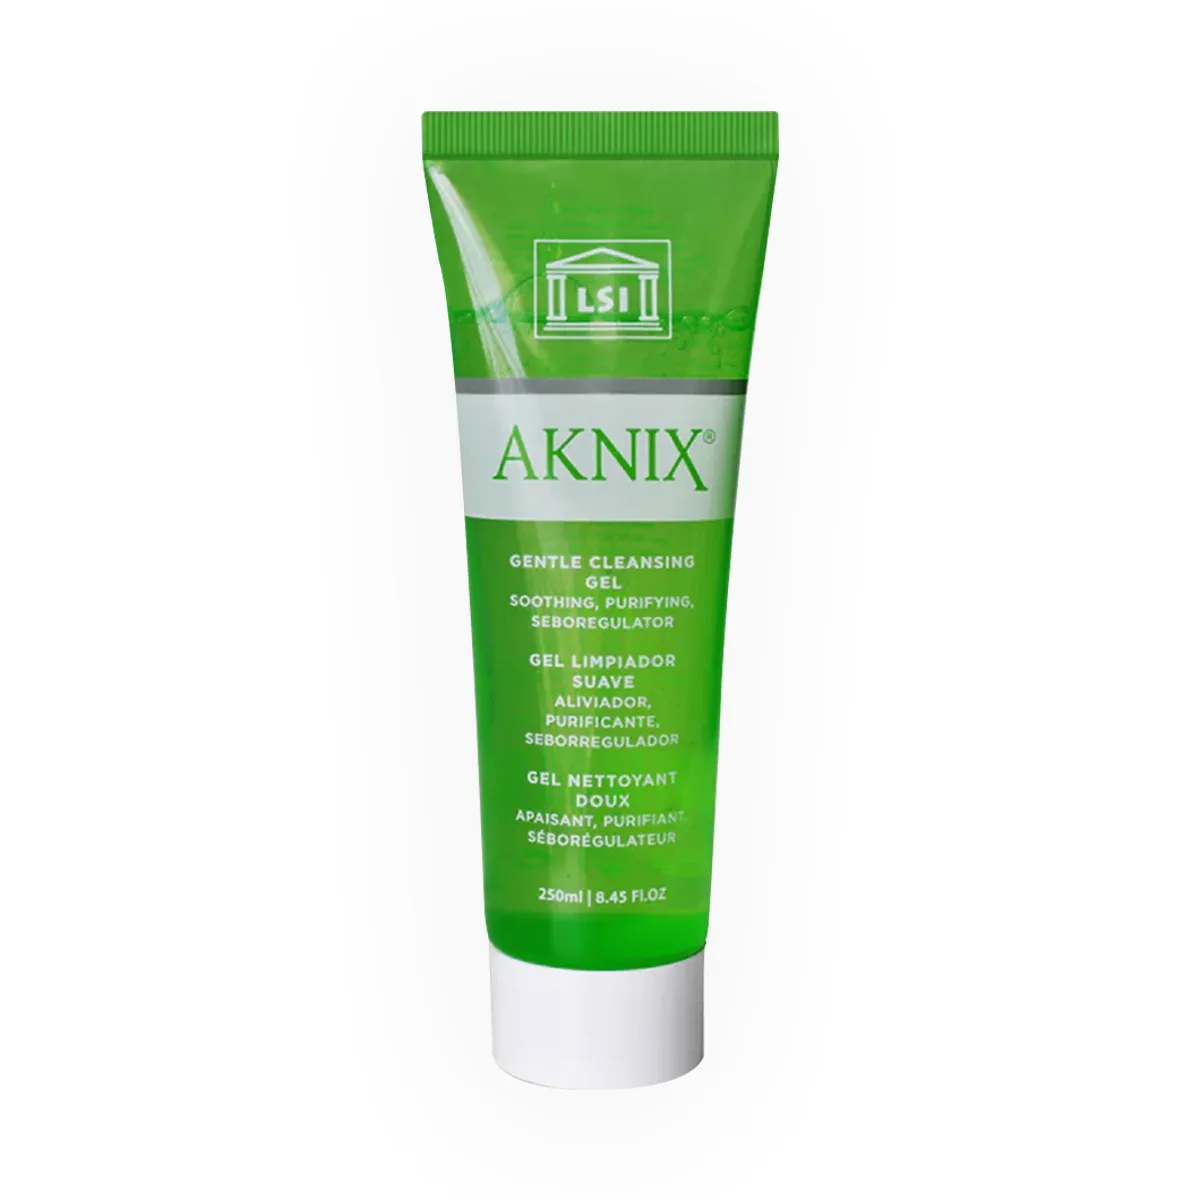 First product image of Aknix Gentle Cleansing Gel 250ml